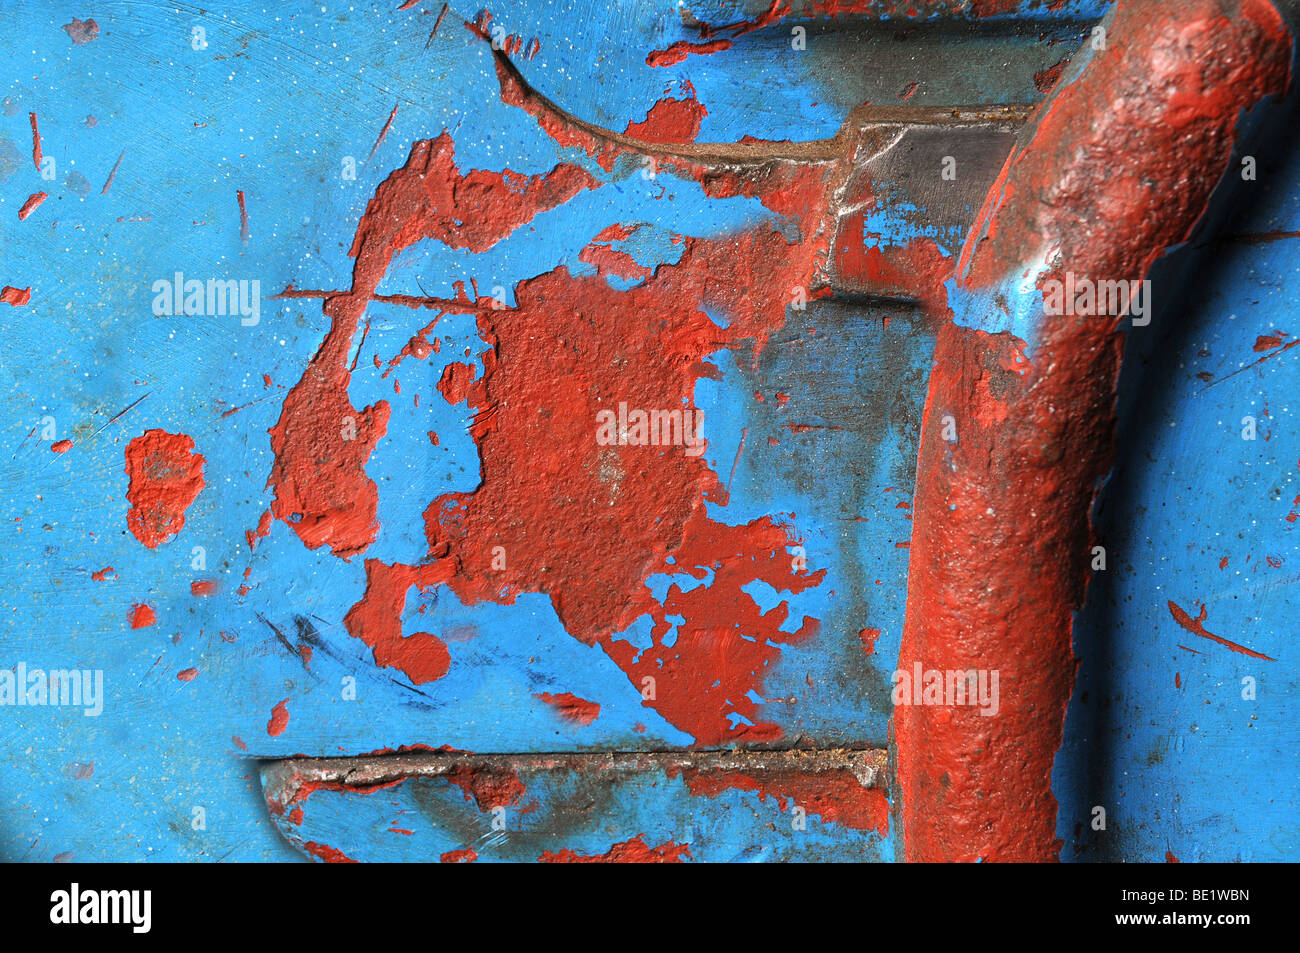 Grunge industrial background with red and blue Stock Photo